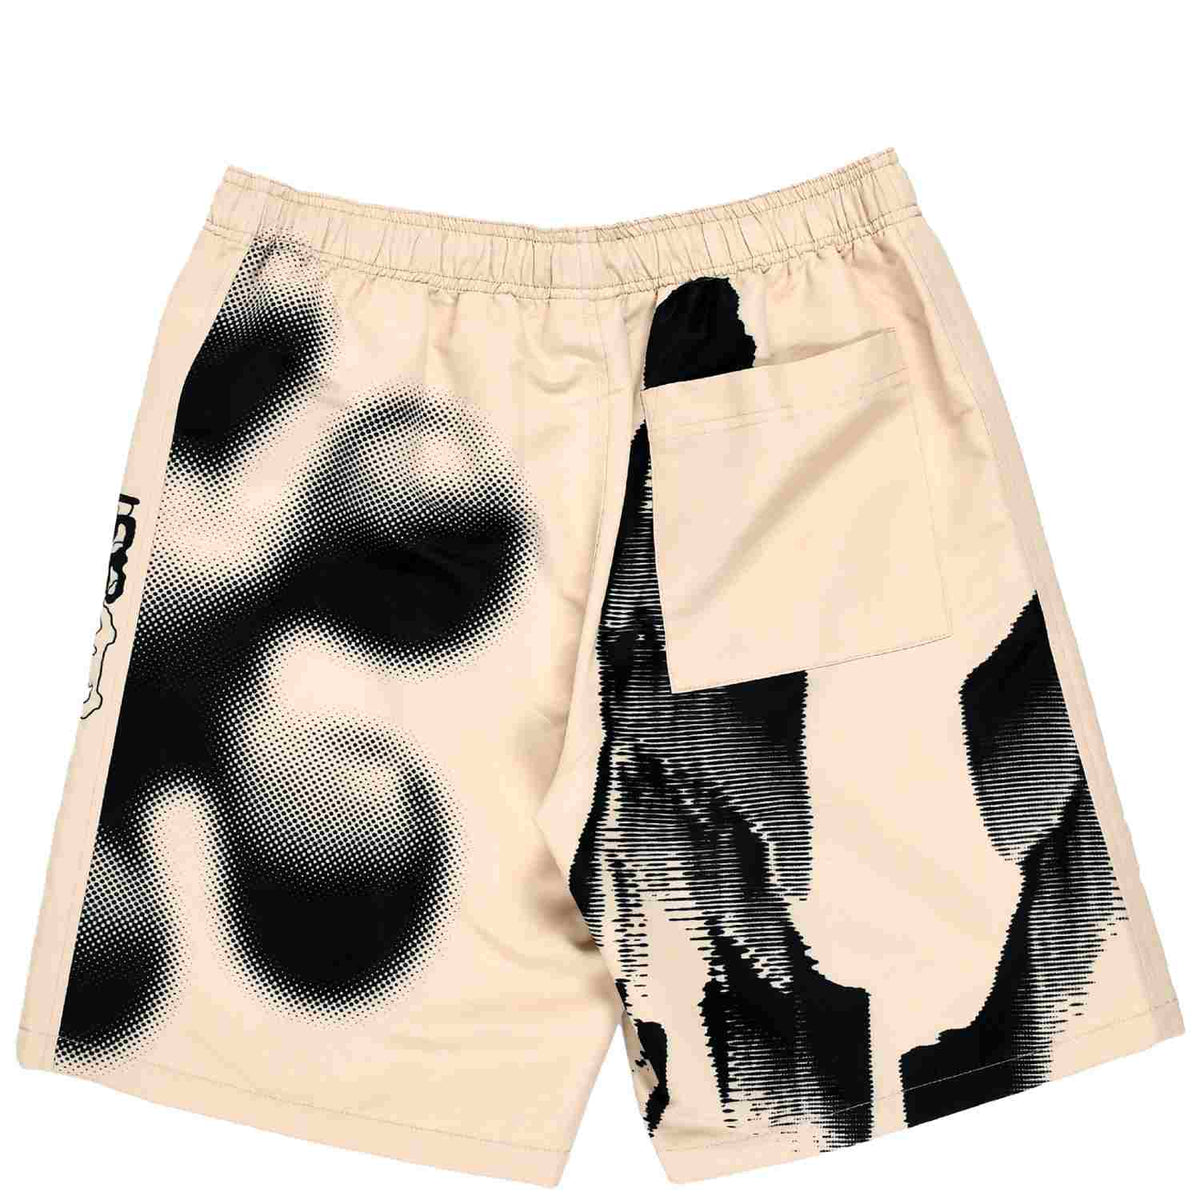 Quasi - Storm Short - Bone swim trunks in cream color with distorted image of a face and sun printed in black featuring back pocket on back right side.